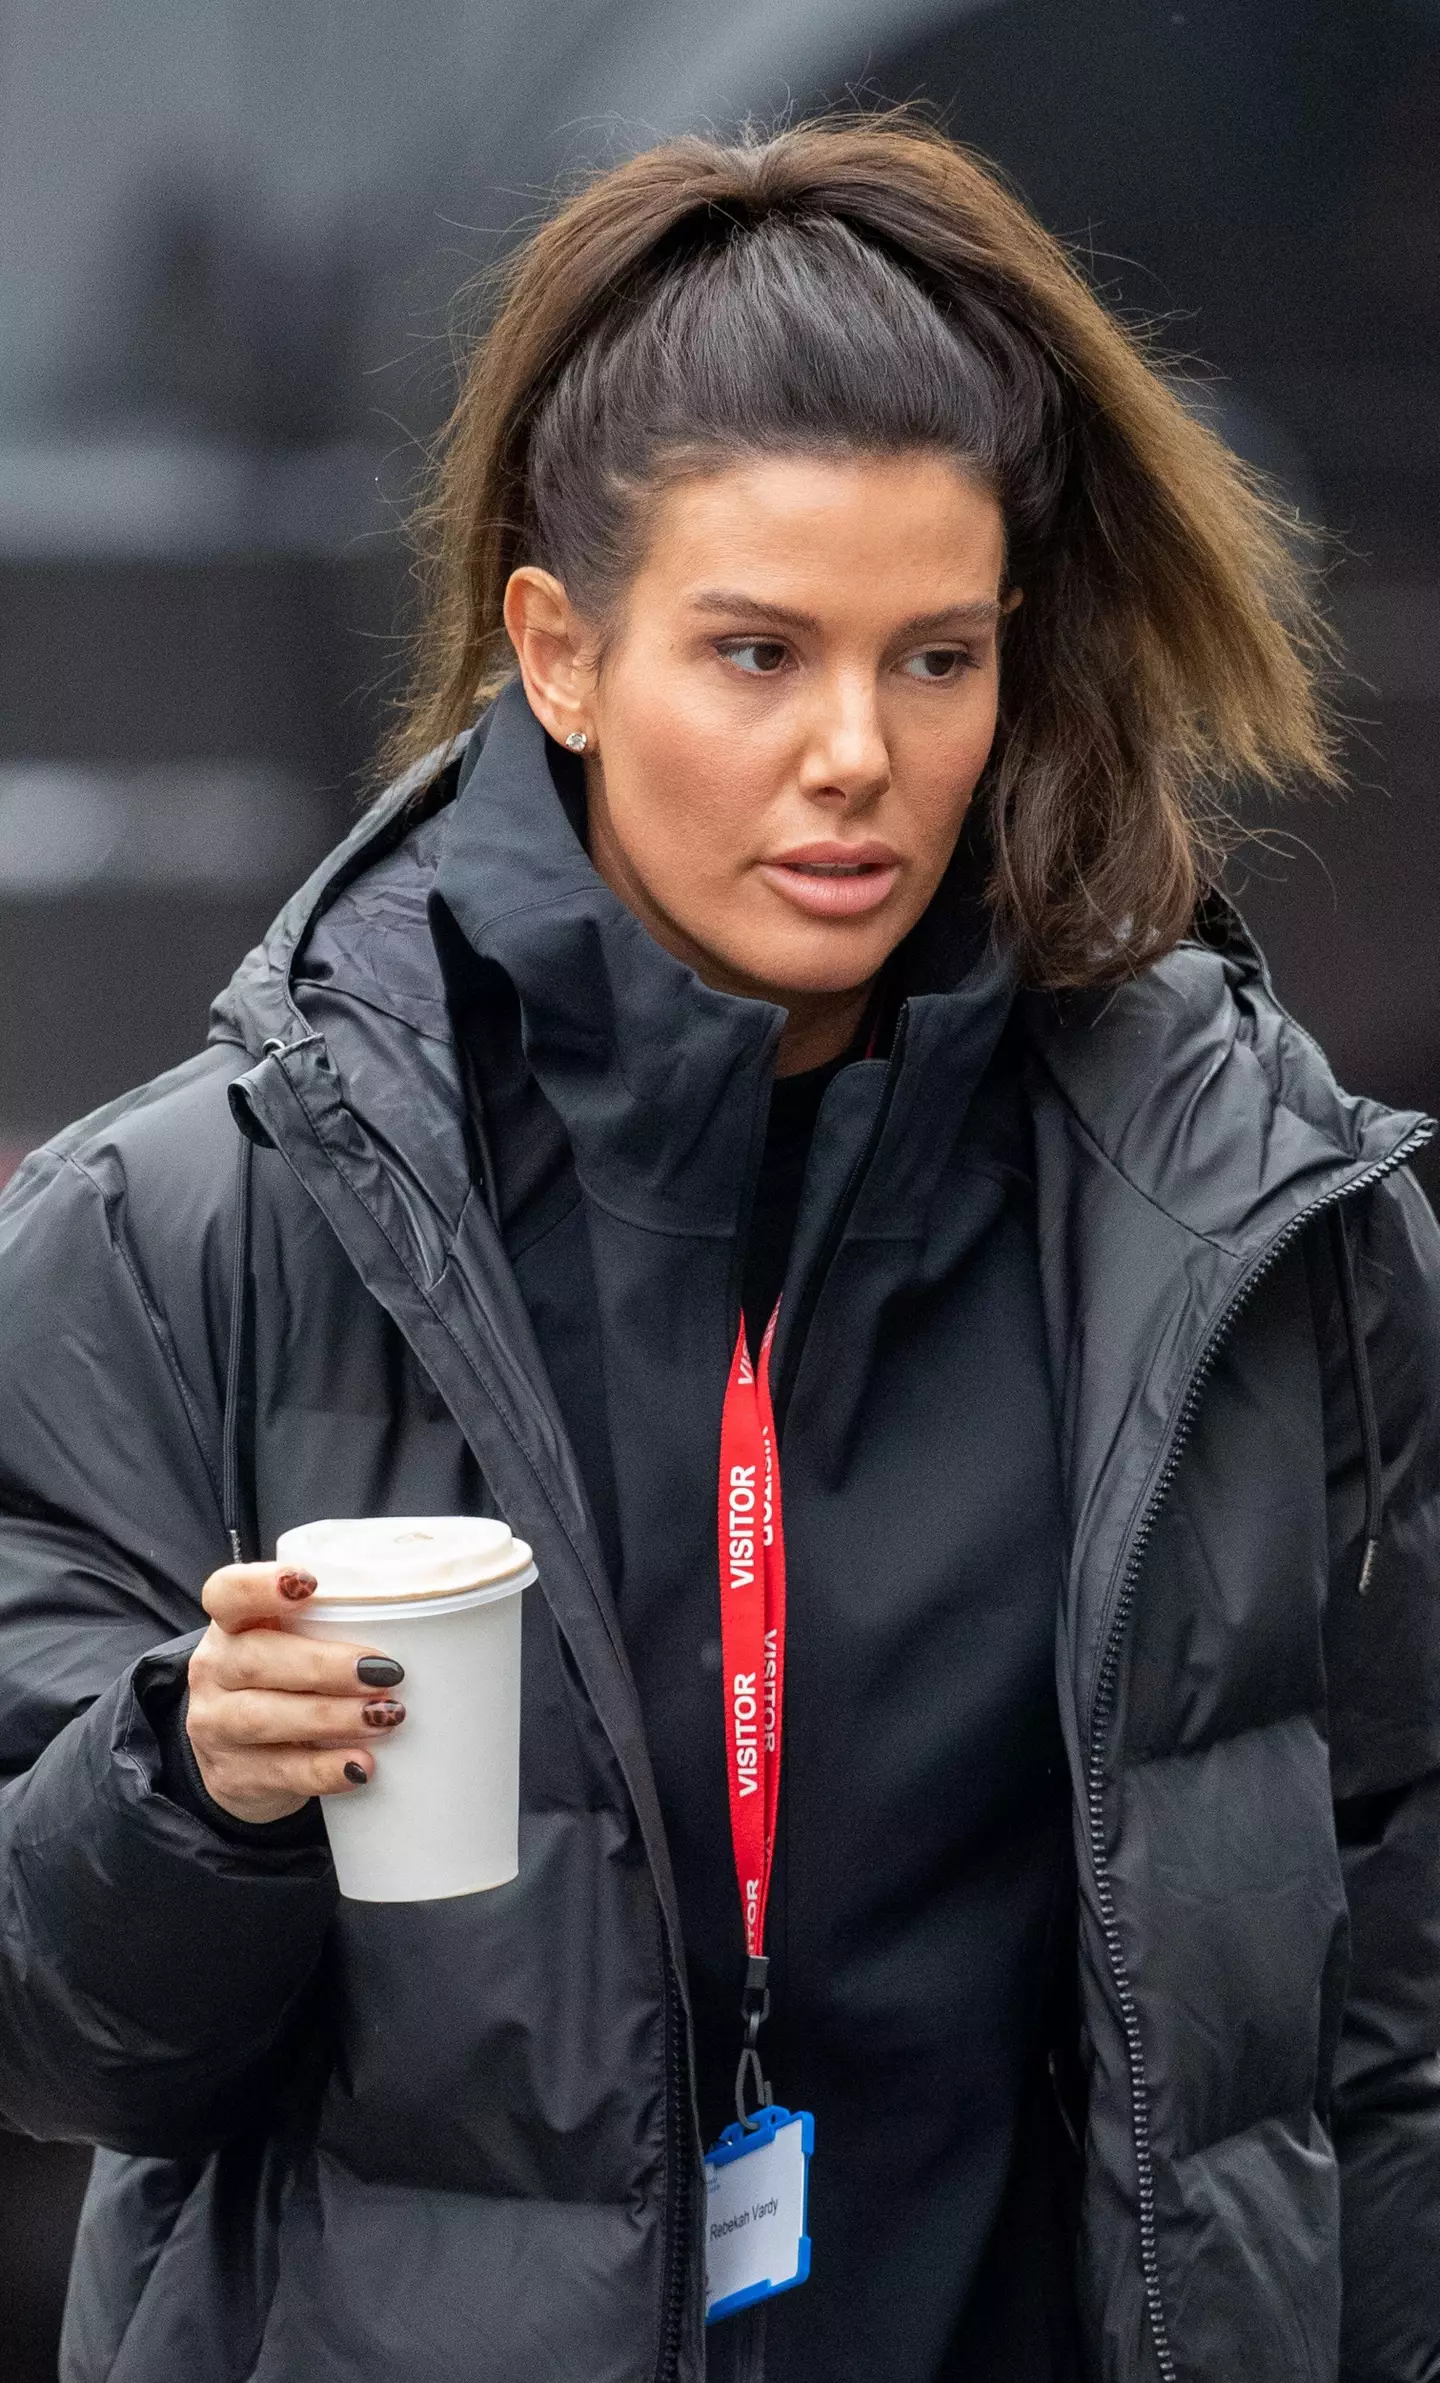 Rebekah Vardy attempted to sell the story to The Sun, The High Court has heard (Image: PA)